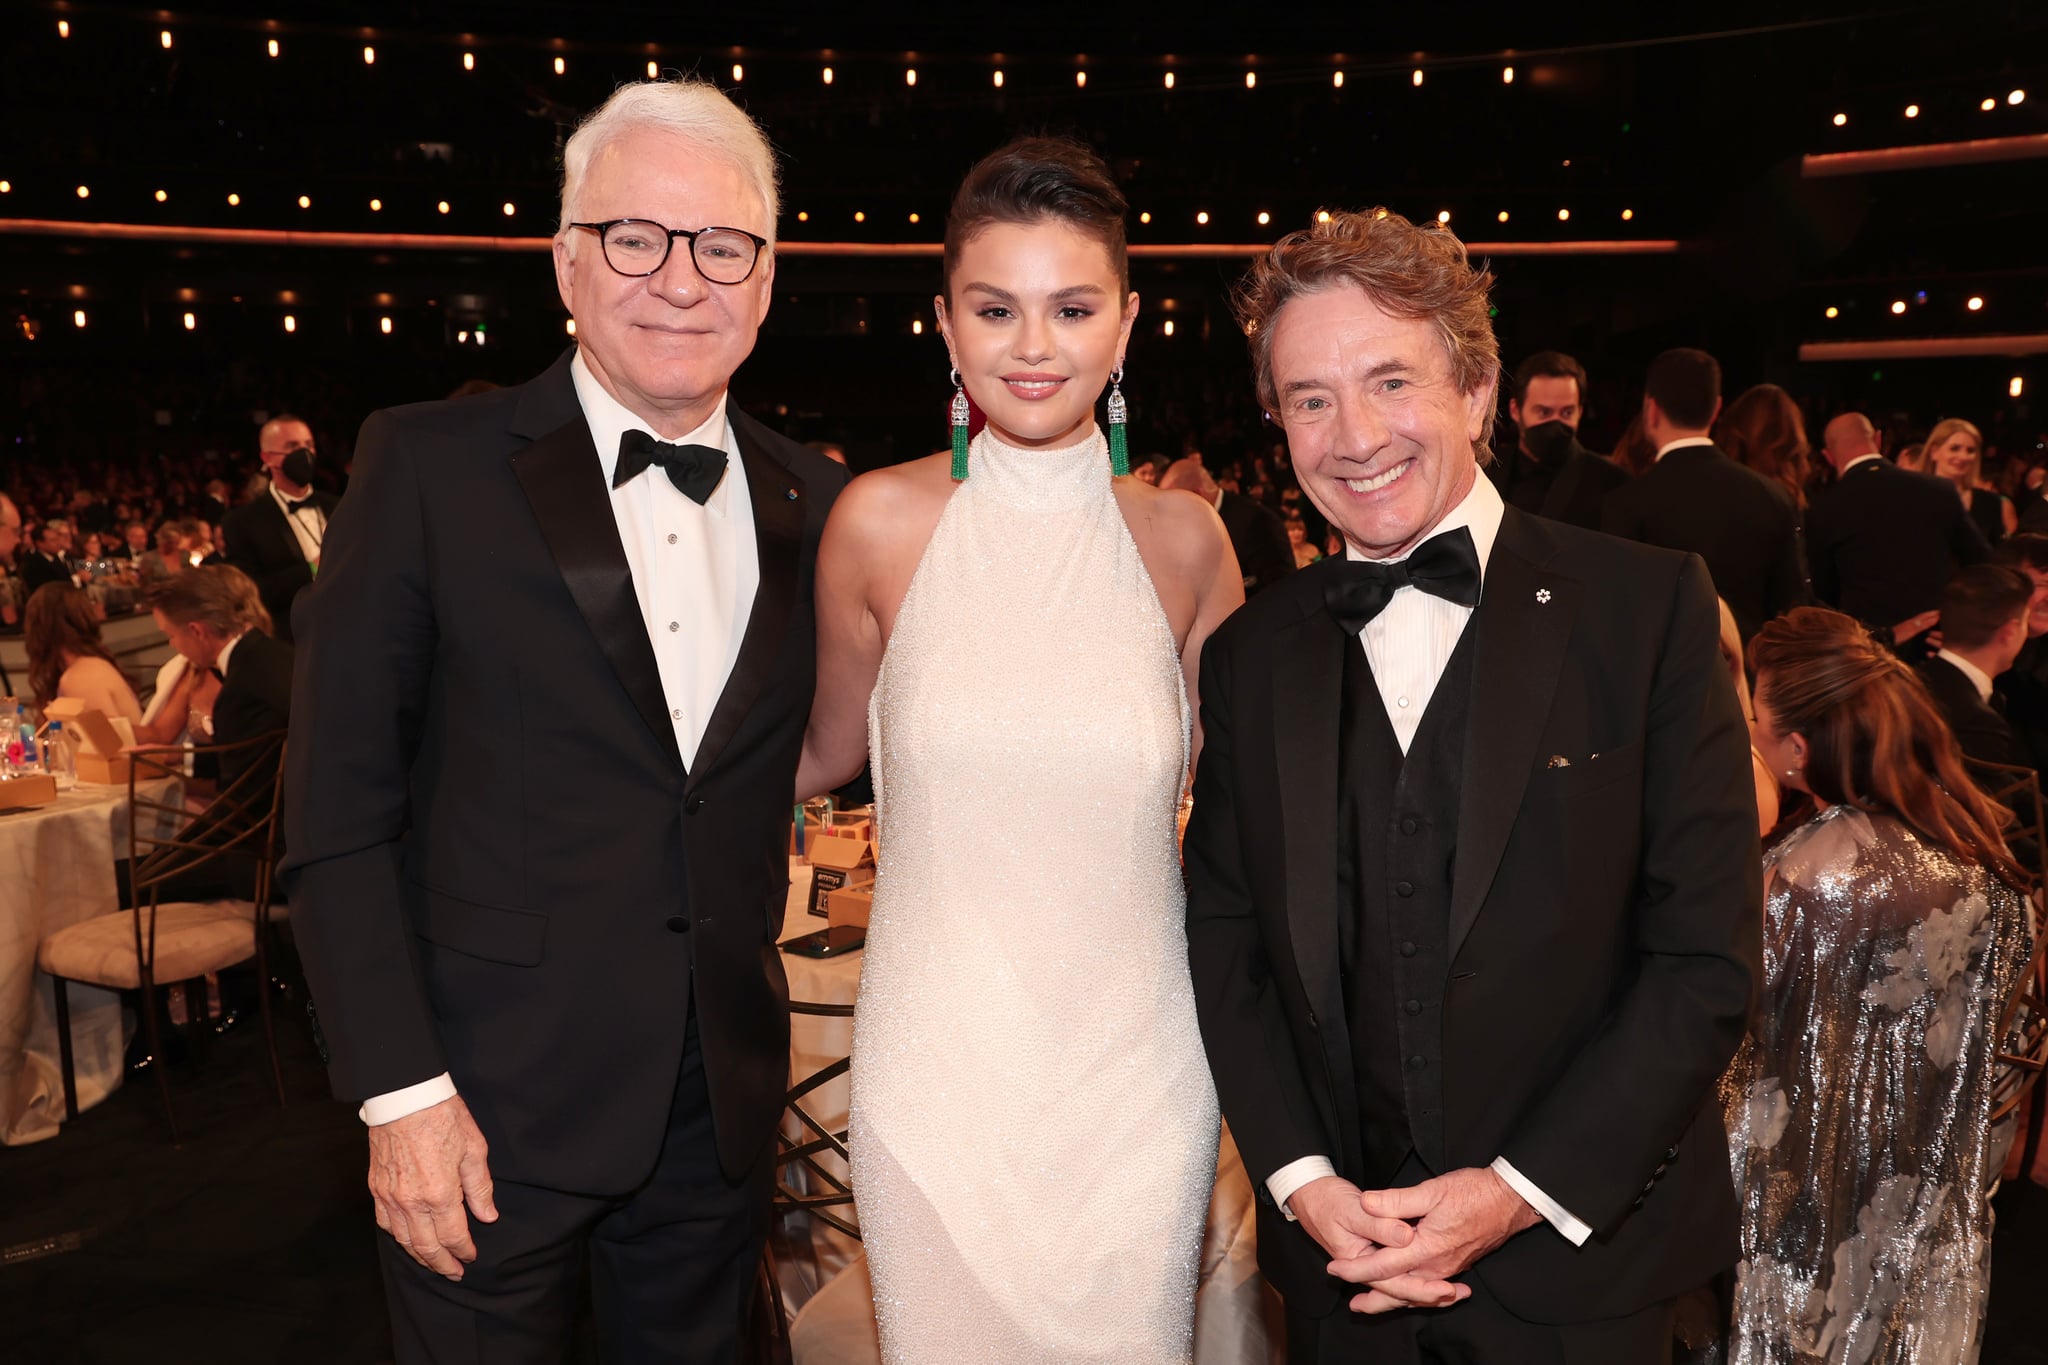 LOS ANGELES, CALIFORNIA - SEPTEMBER 12: 74th ANNUAL PRIMETIME EMMY AWARDS -- Pictured: (l-r) Steve Martin, Selena Gomez, Martin Short attend the 74th Annual Primetime Emmy Awards held at the Microsoft Theatre on September 12, 2022. -- (Photo by Christopher Polk/NBC via Getty Images)